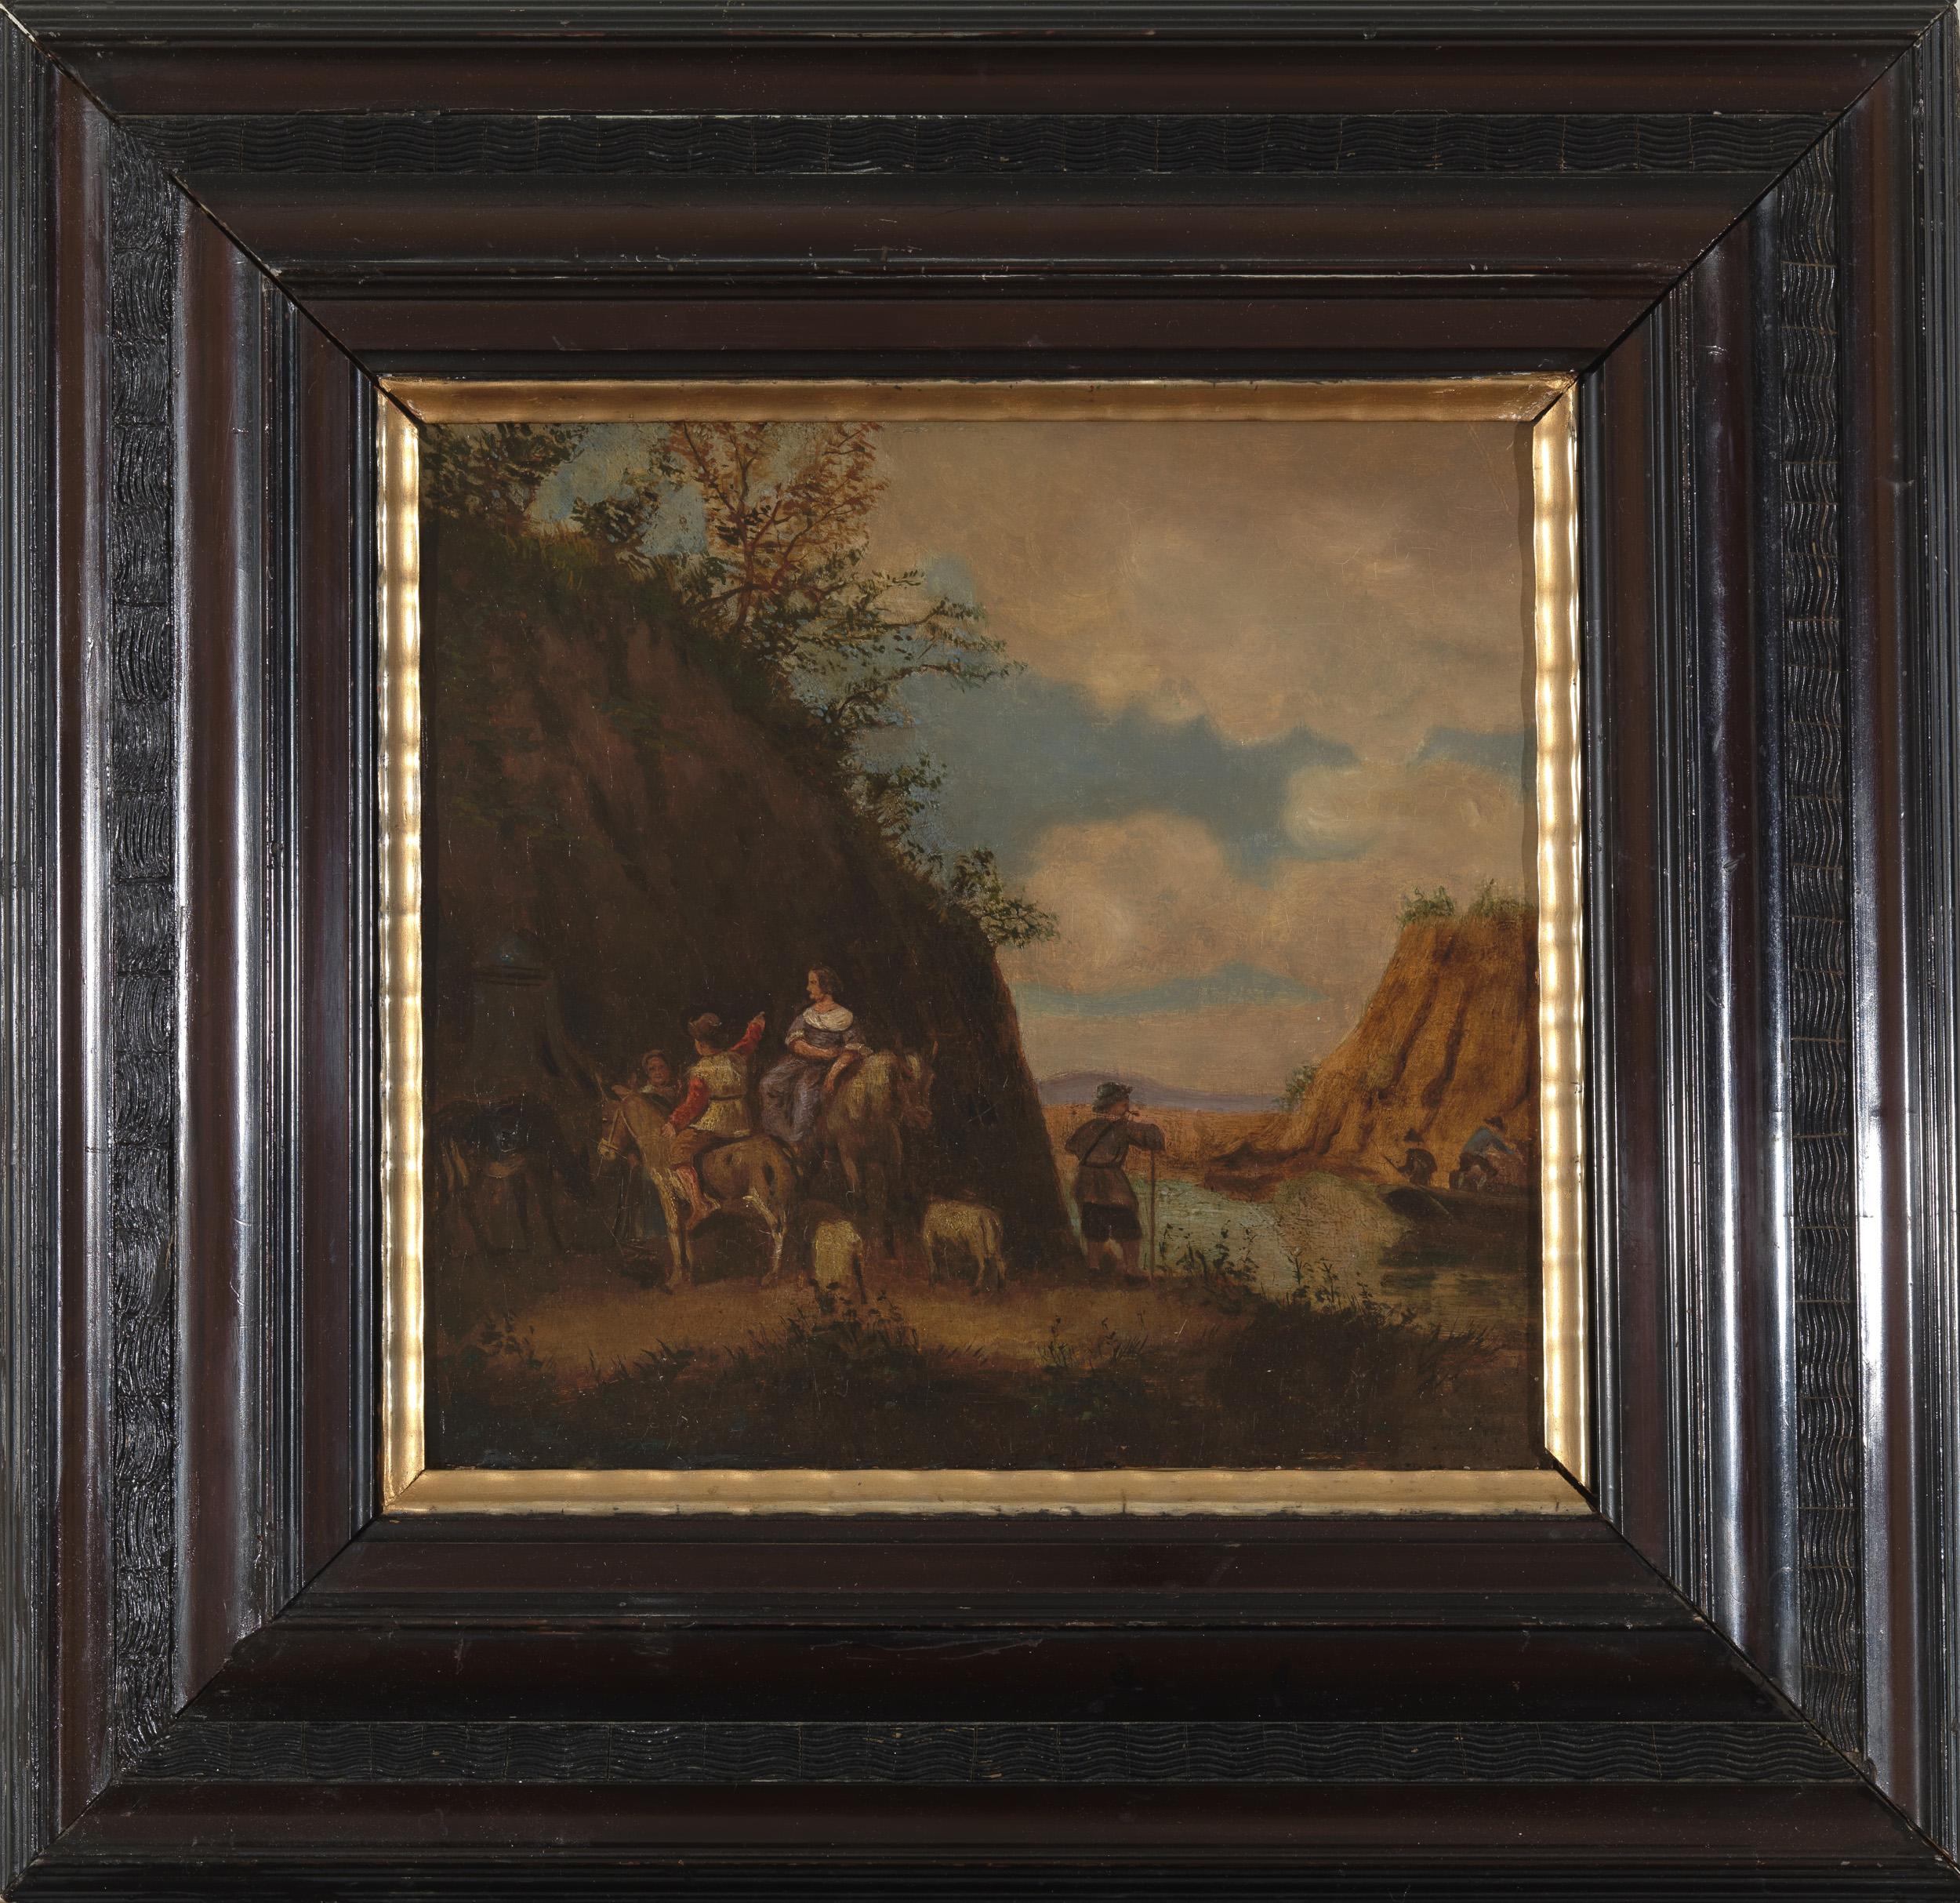 Unknown Figurative Painting - 17th C Landscape with Noblewoman and Squire, Dutch Shool, Oil on Copper, Framed